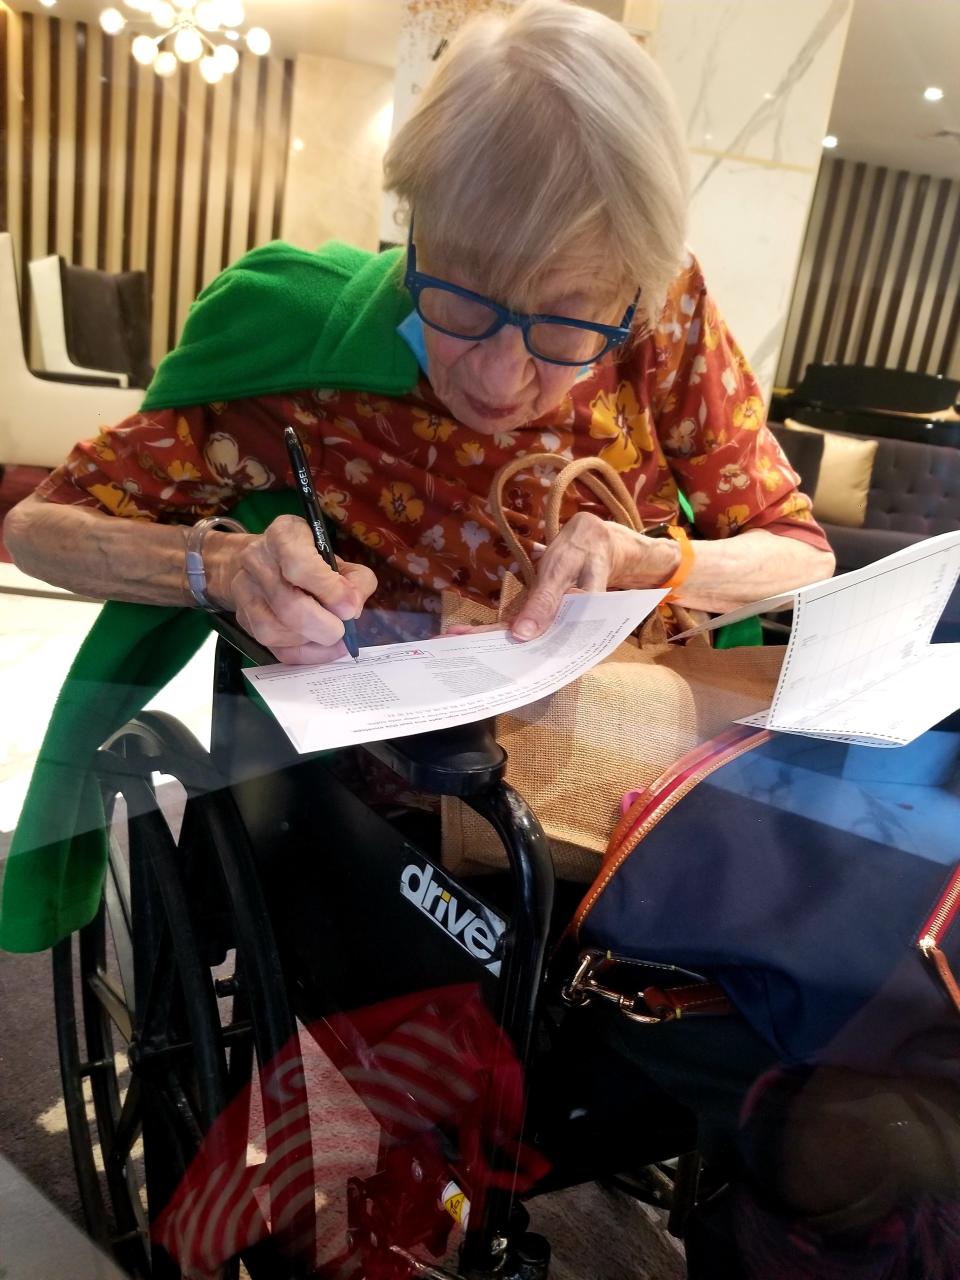 Claire Campbell took this photograph through a window at The Riverside Premier Rehabilitation and Healing Center in Manhattan as her mother Grace Campbell filled out her 2020 absentee ballot during COVID lockdown.